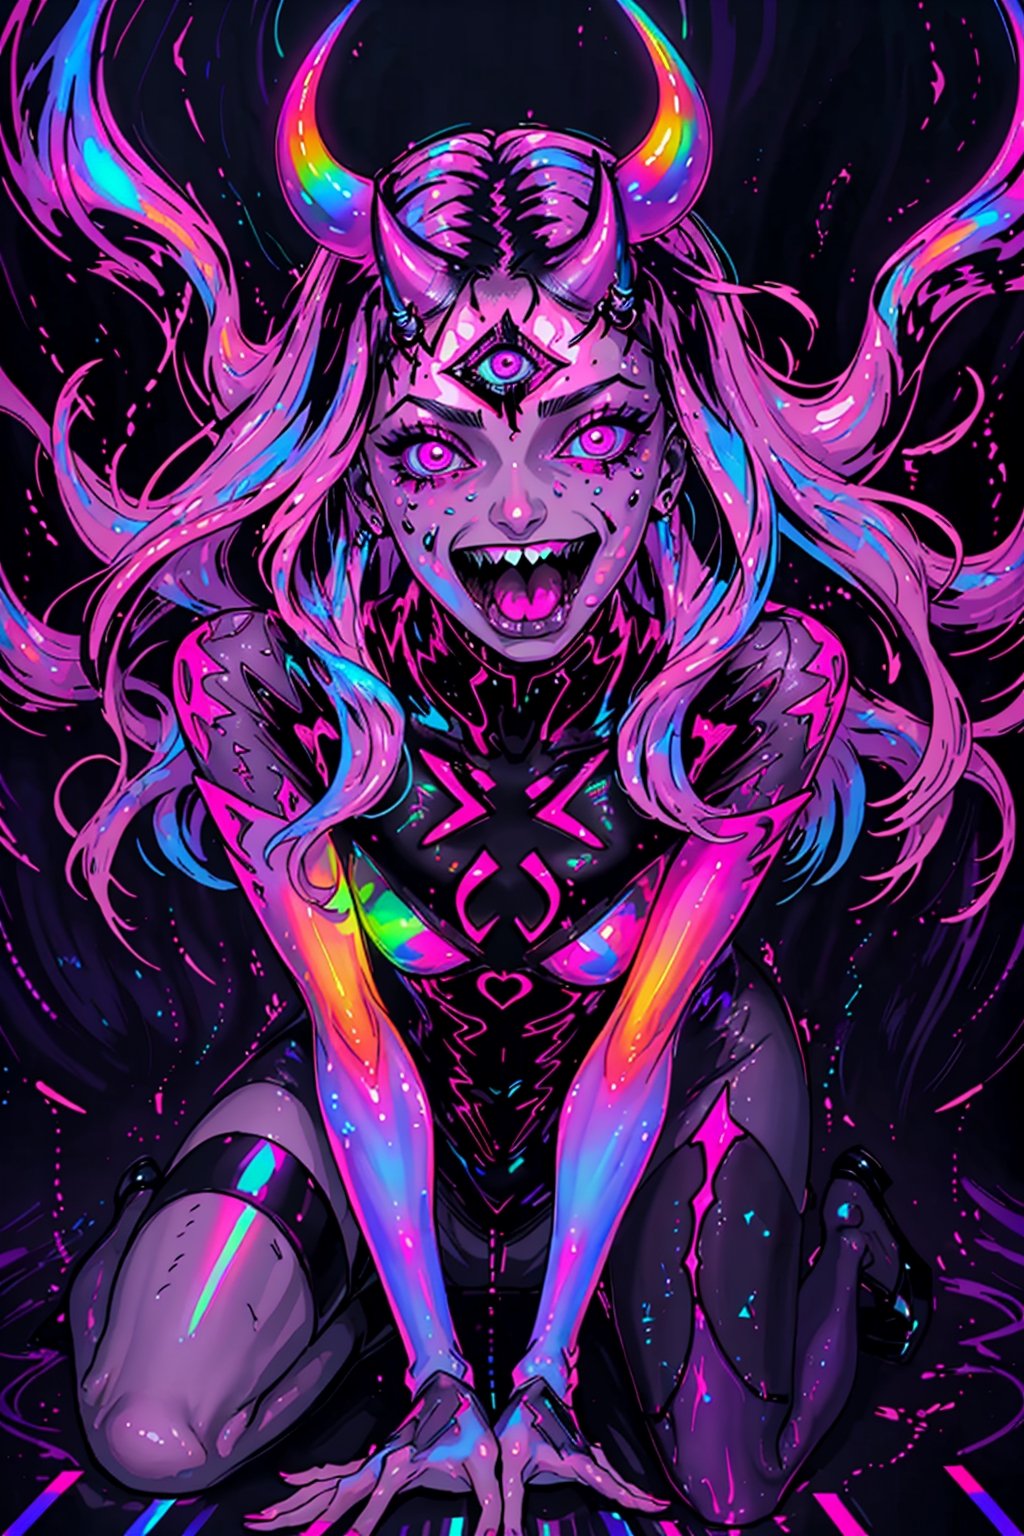 pale demon girl , (prismatic coloring, holographic vibe, chromatic:1.2) , third eye in forehead, black lace transparent blouse, under transparent clothes you can see firm breasts, bonfage clothes, massive dog collar, elegant shoes and wide fishnet stockings, full body, full body in frame, full length, flies towards you, ready to attack, attacks, wants to eat, there are a lot of very sharp teeth in the mouth, grins, the mouth is open, there are several rows of teeth in the mouth like a shark, a monster, a sexy monster, a succubus, gothic nightclub background, neon pink lights, dark, gloomy, very dark, dim neon light, in the background there are small leather sofas illuminated from below with neon, breasts visible, (long straight horns:1.2), looks at you as a victim of his sexual pleasures, dark anime,donmcr33pyn1ghtm4r3xl  ,Butcha,highres,demonic third eye,DonMCr33pyN1ghtm4r3 ,Female,disgusting body horror